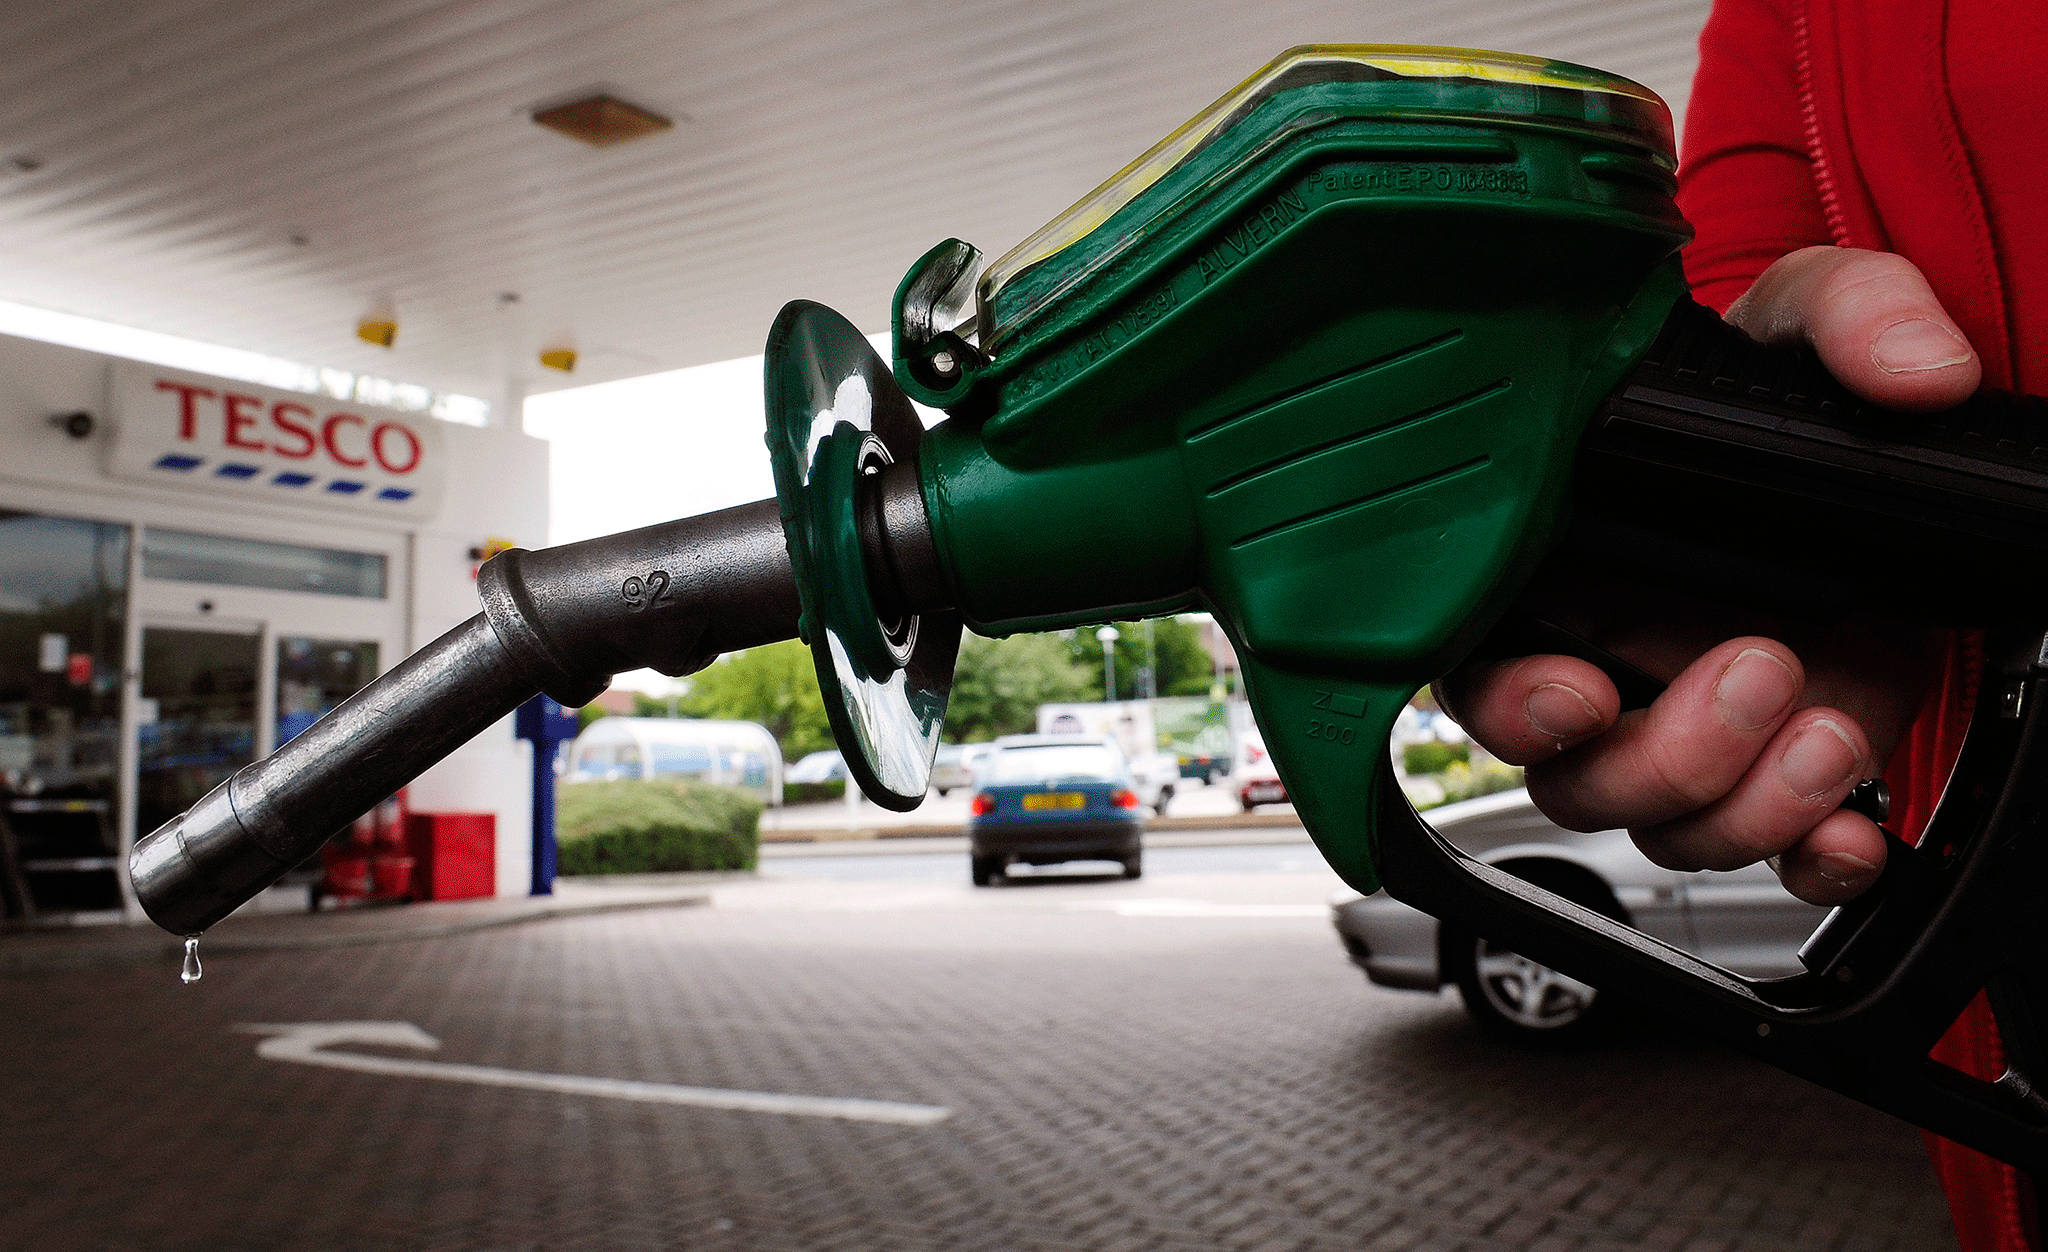 Asda, Tesco and Sainsbury’s join Morrisons in cutting petrol prices but ‘could have passed on savings sooner’